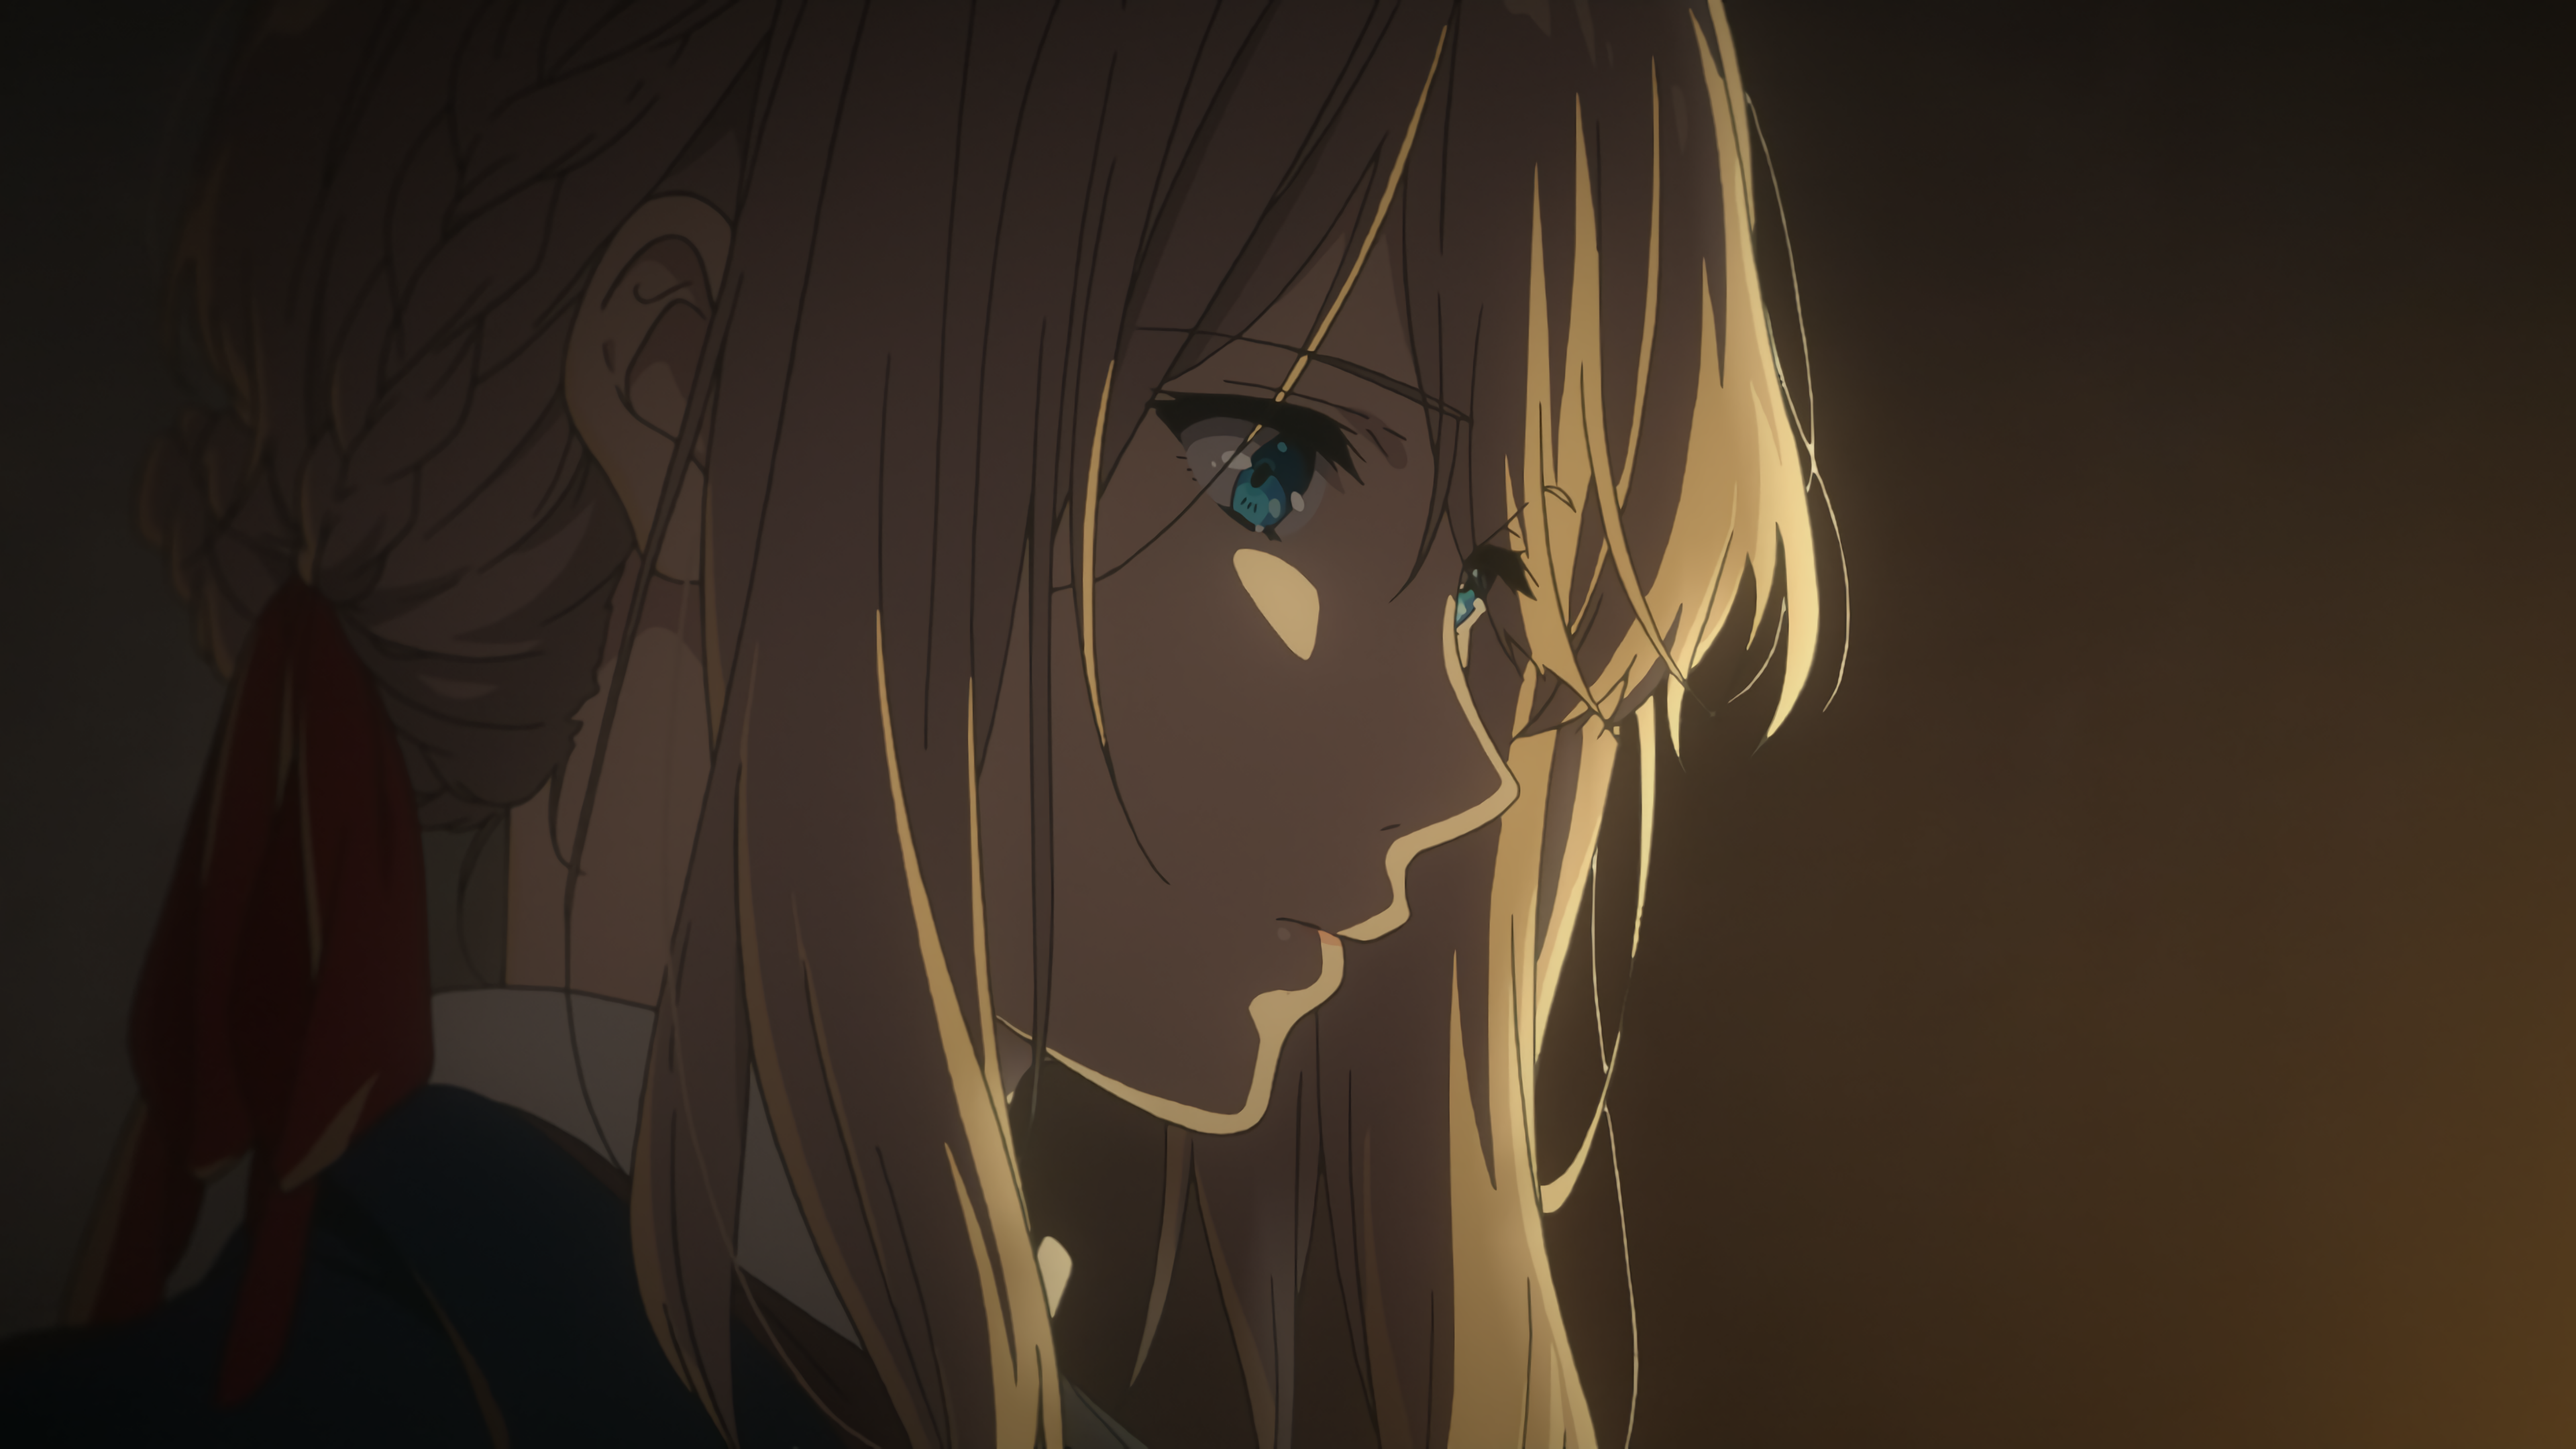 Violet Evergarden: The Movie Picture